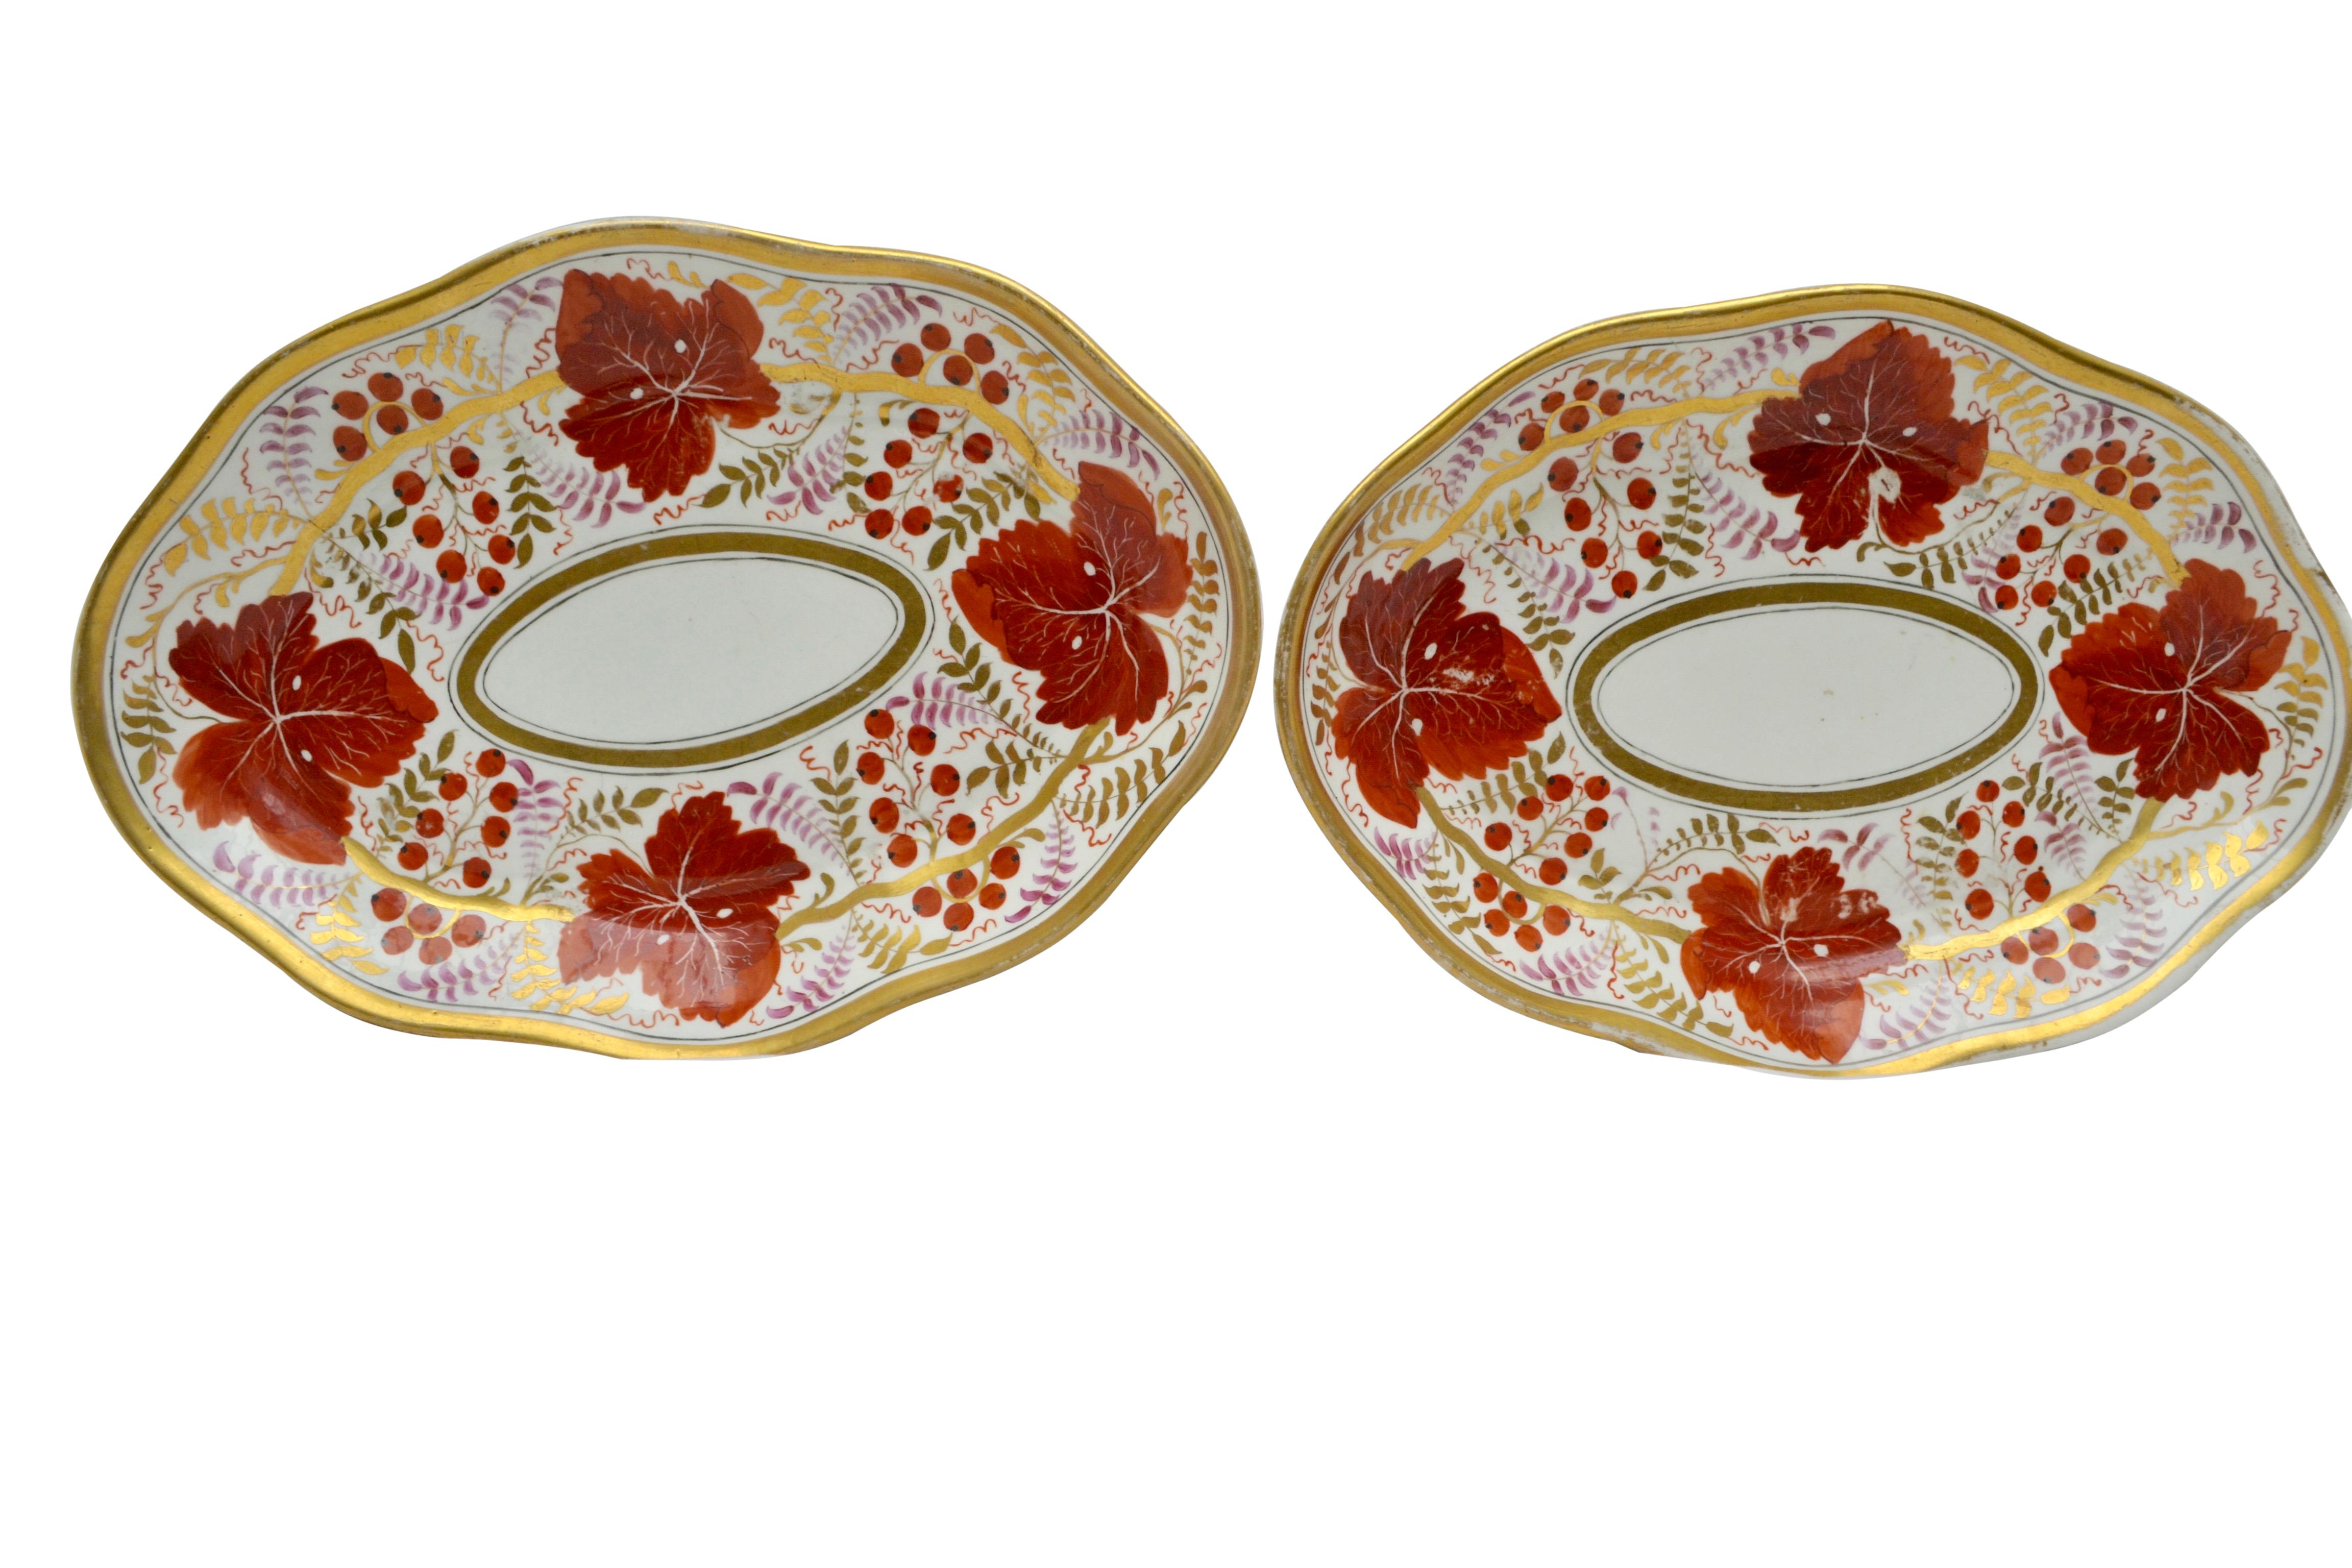 Two pairs of coral, white and gilded oval shaped Coalport serving dishes English, circa 1820. Measurements for the pair with orange ivy leaves 11.5? L x 8? W x 1.75? H Some rubbing of the gilding but no cracks or repairs on this pair. Measurements